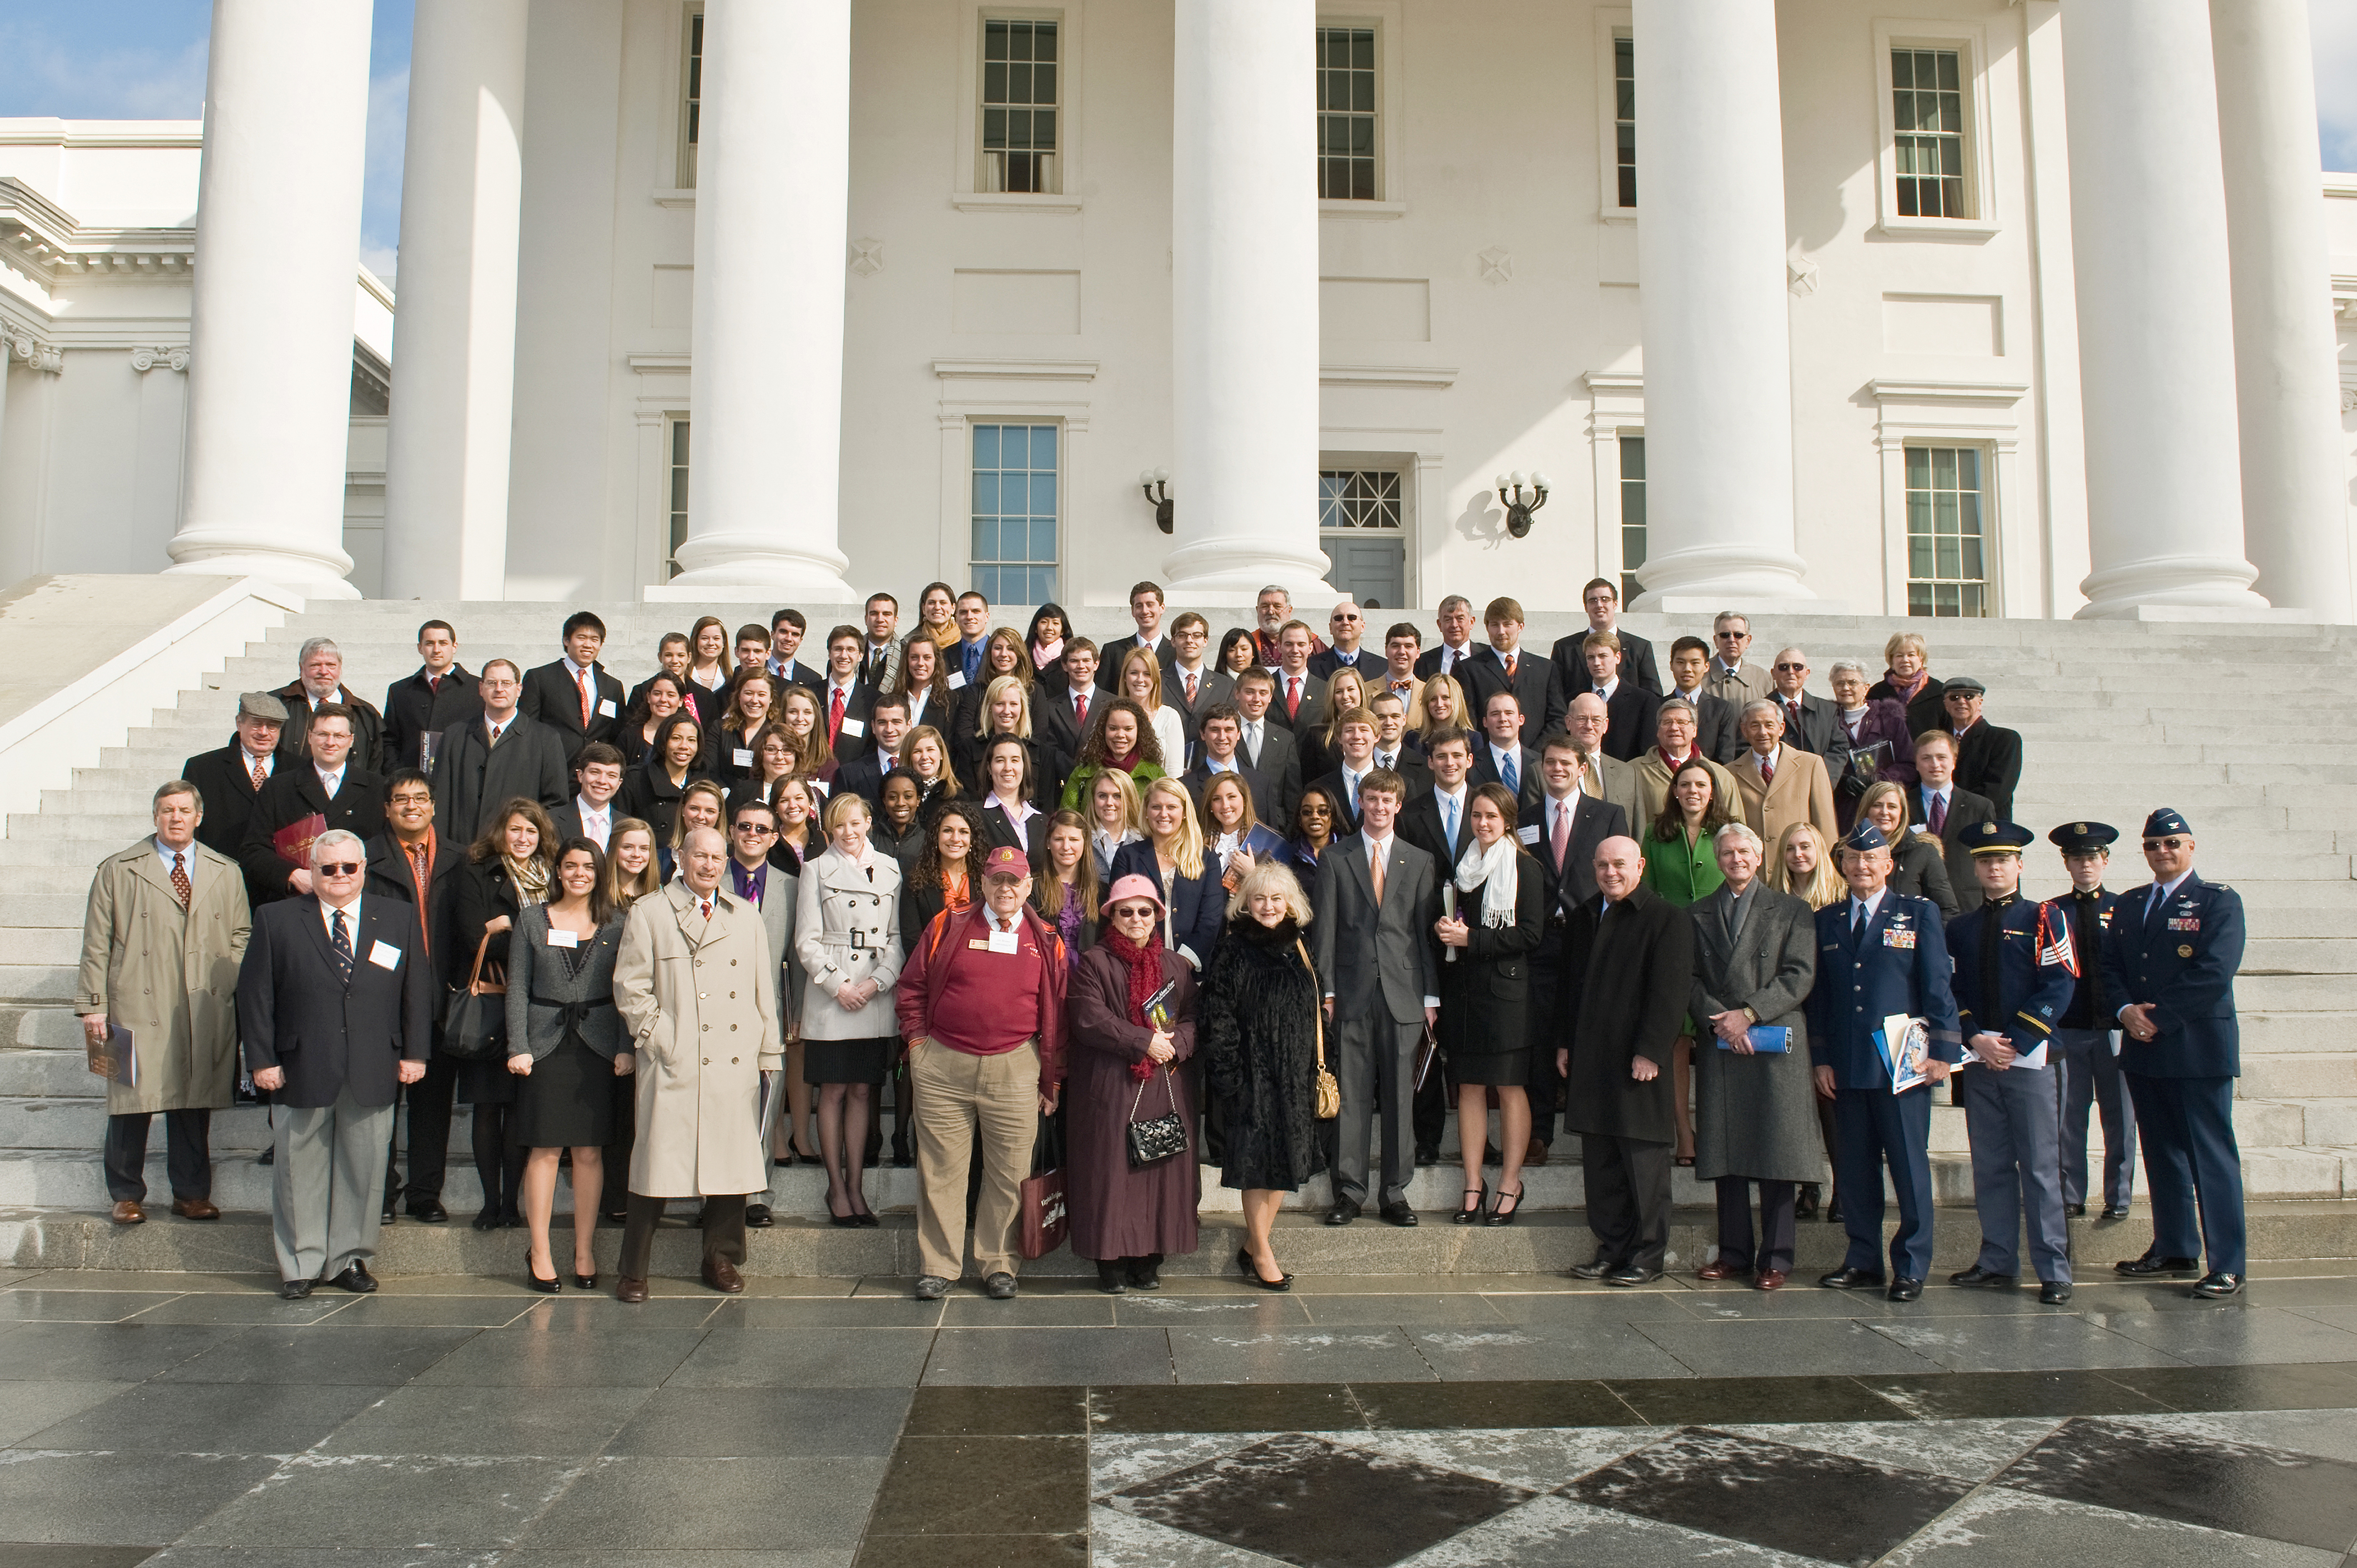 Virginia Tech's Student Government Association representatives with distinguished Virginia Tech alumni, university officials, and representatives of the governor